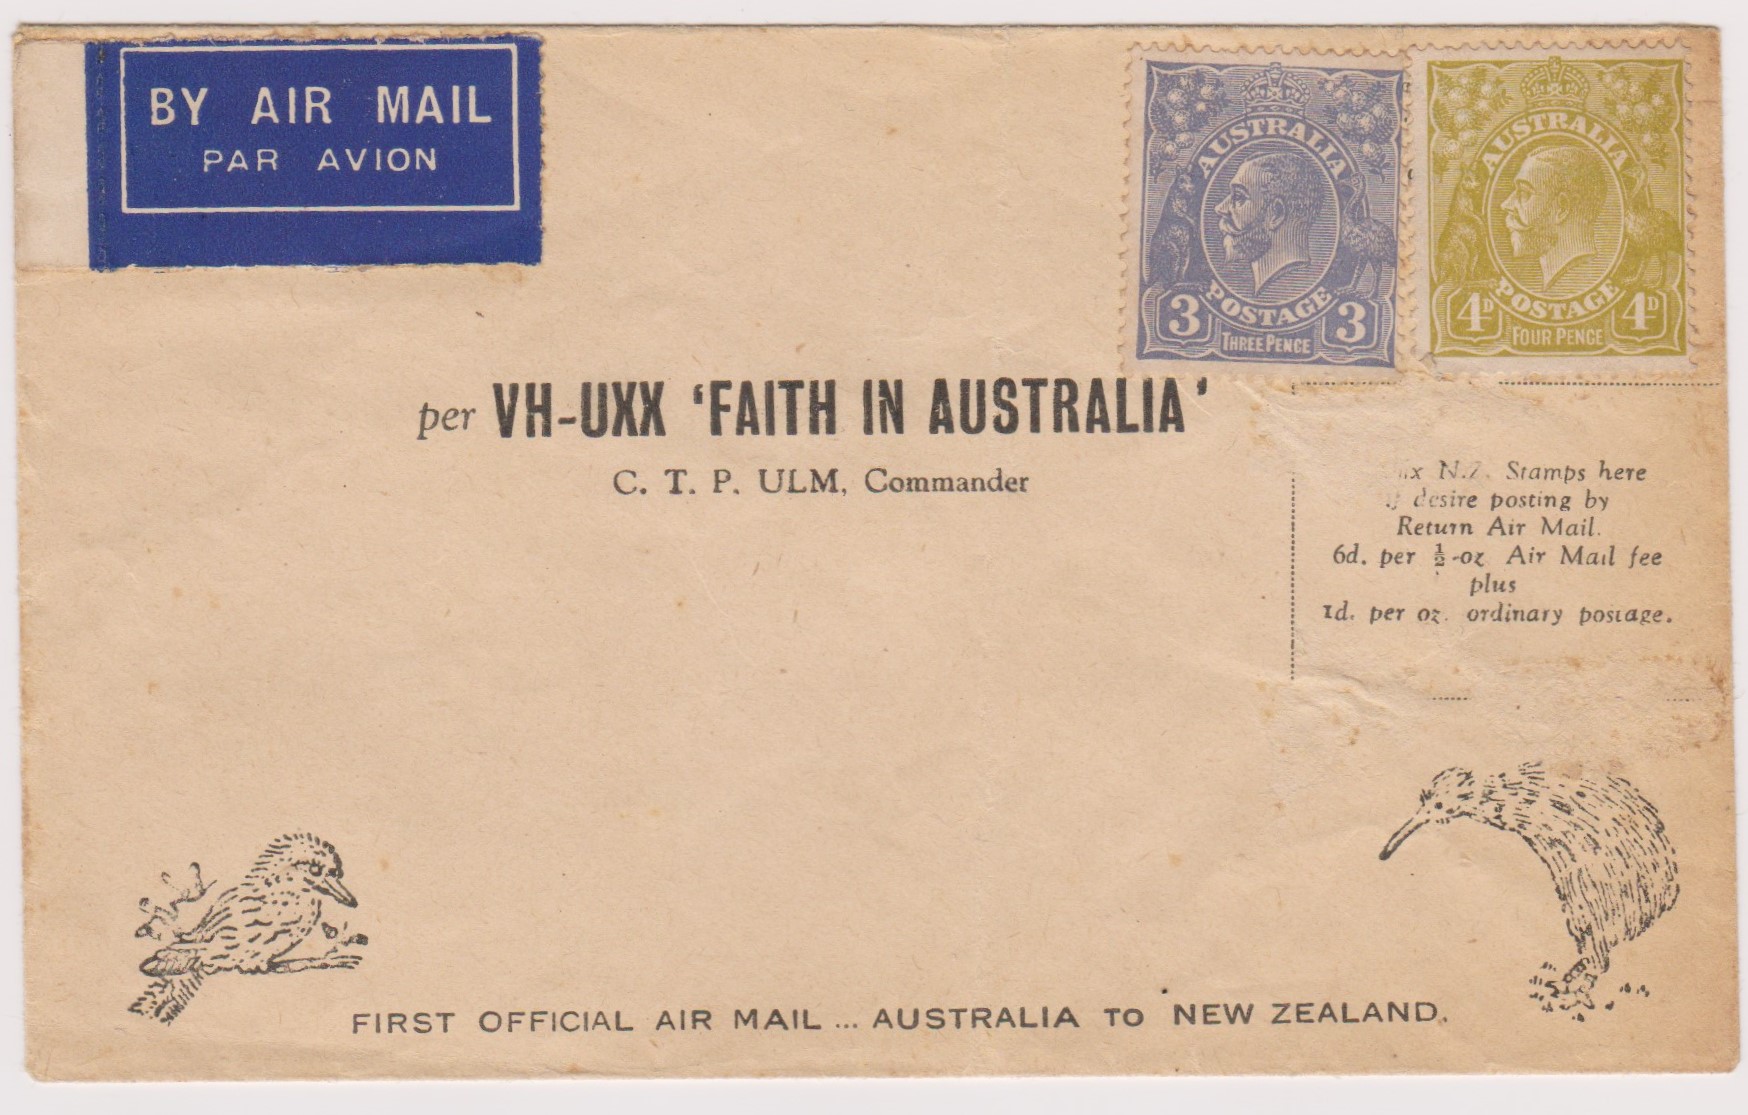 Australia 1934 unaddressed 1st official airmail envelope for Australia - New Zealand route carried